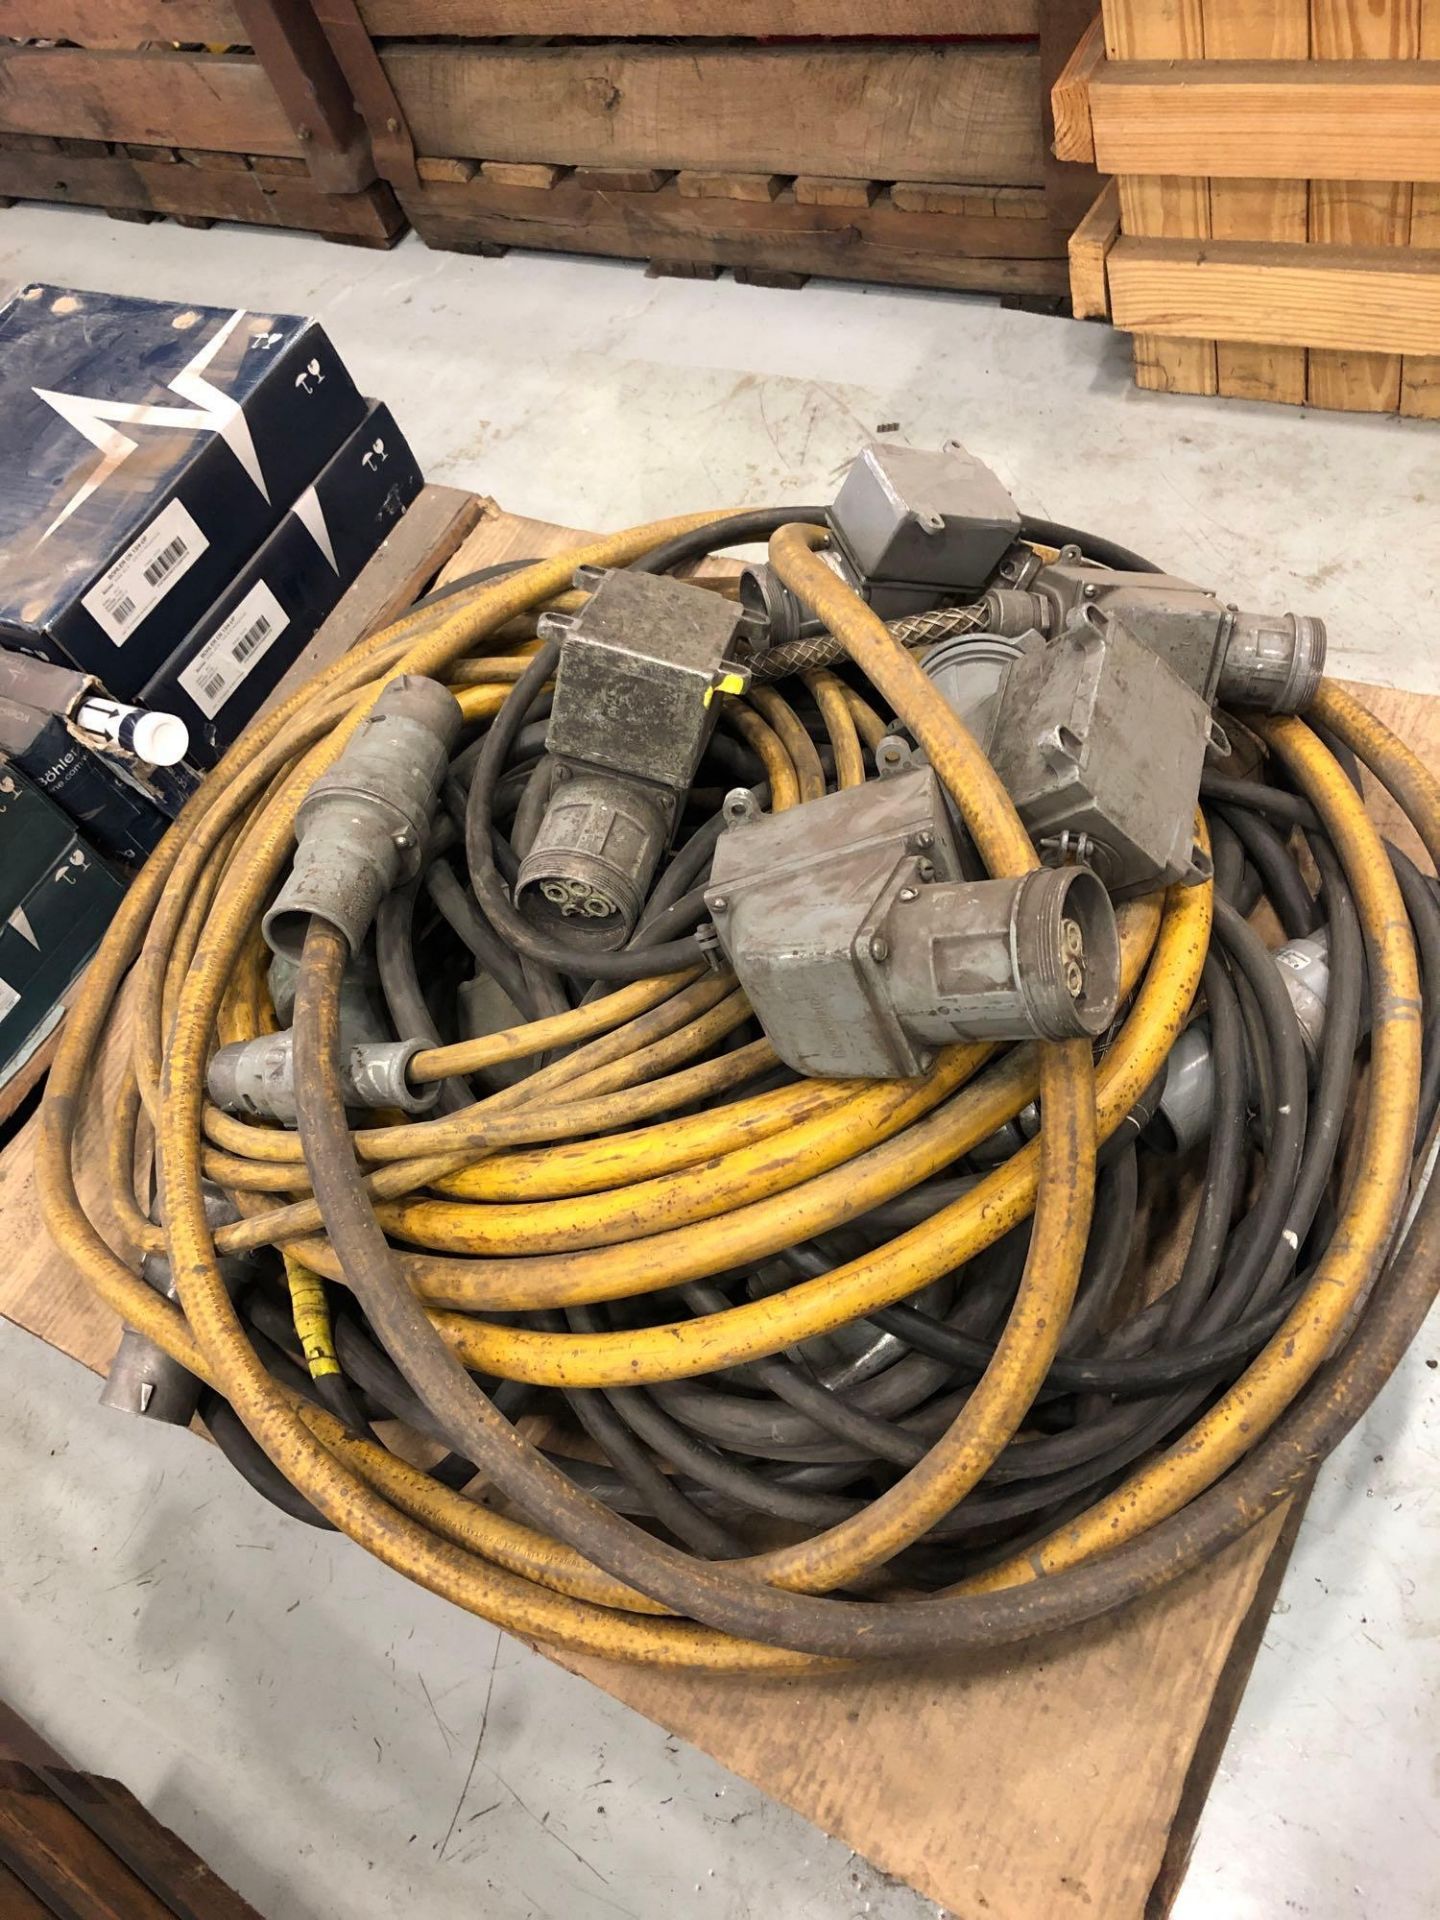 Lot of Electrical Cables w/ Connectors, Some Male & Female Connectors